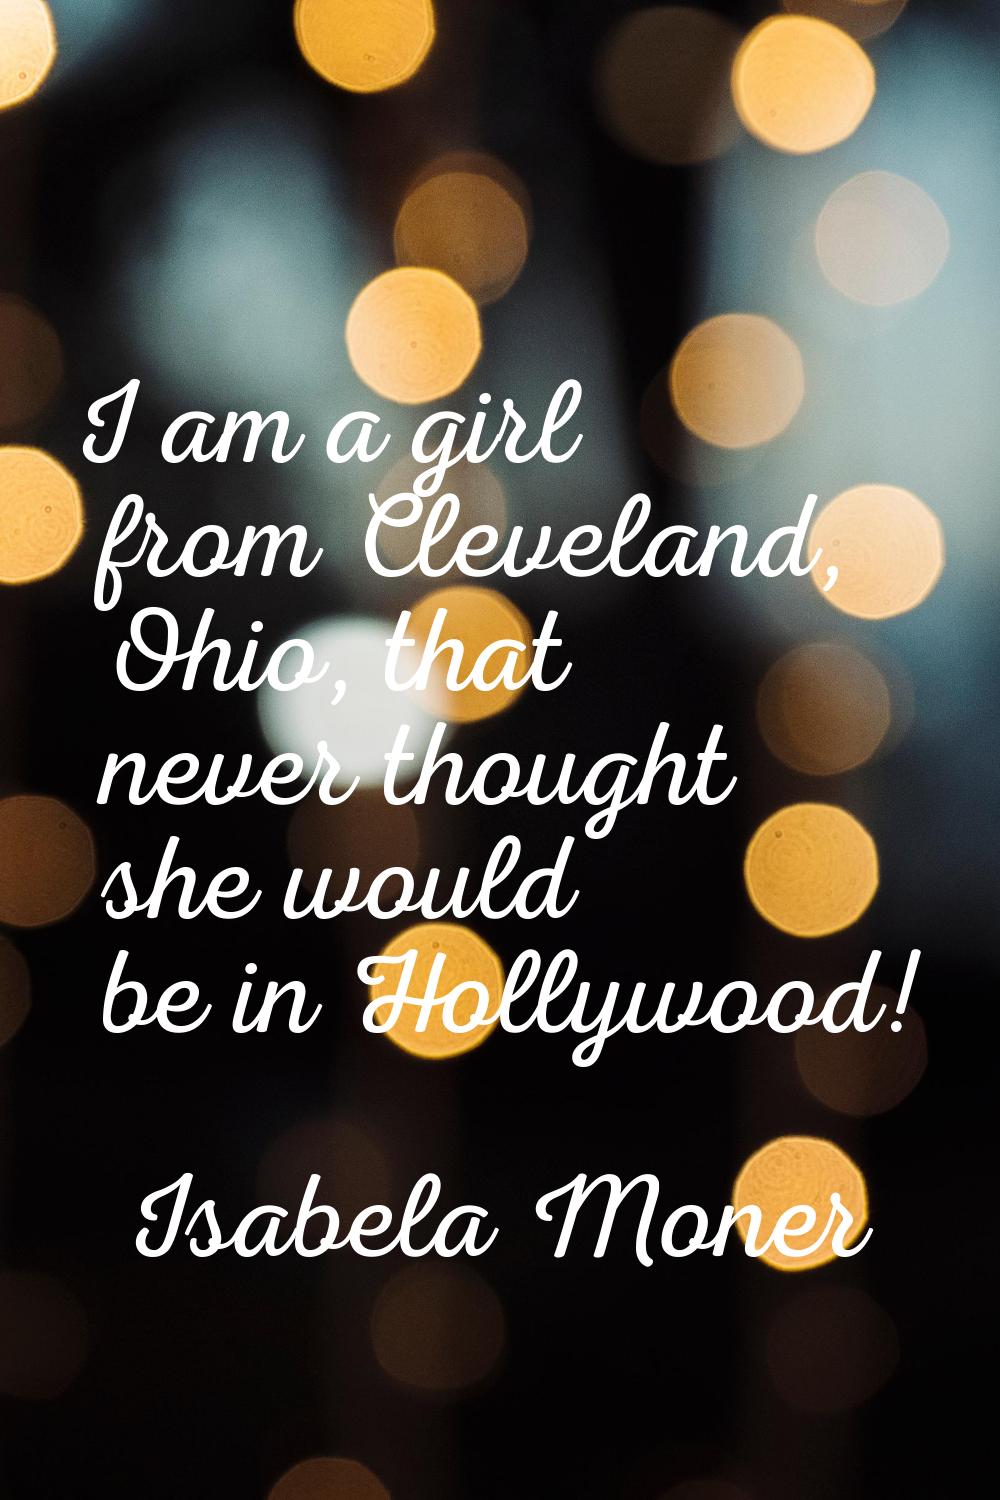 I am a girl from Cleveland, Ohio, that never thought she would be in Hollywood!